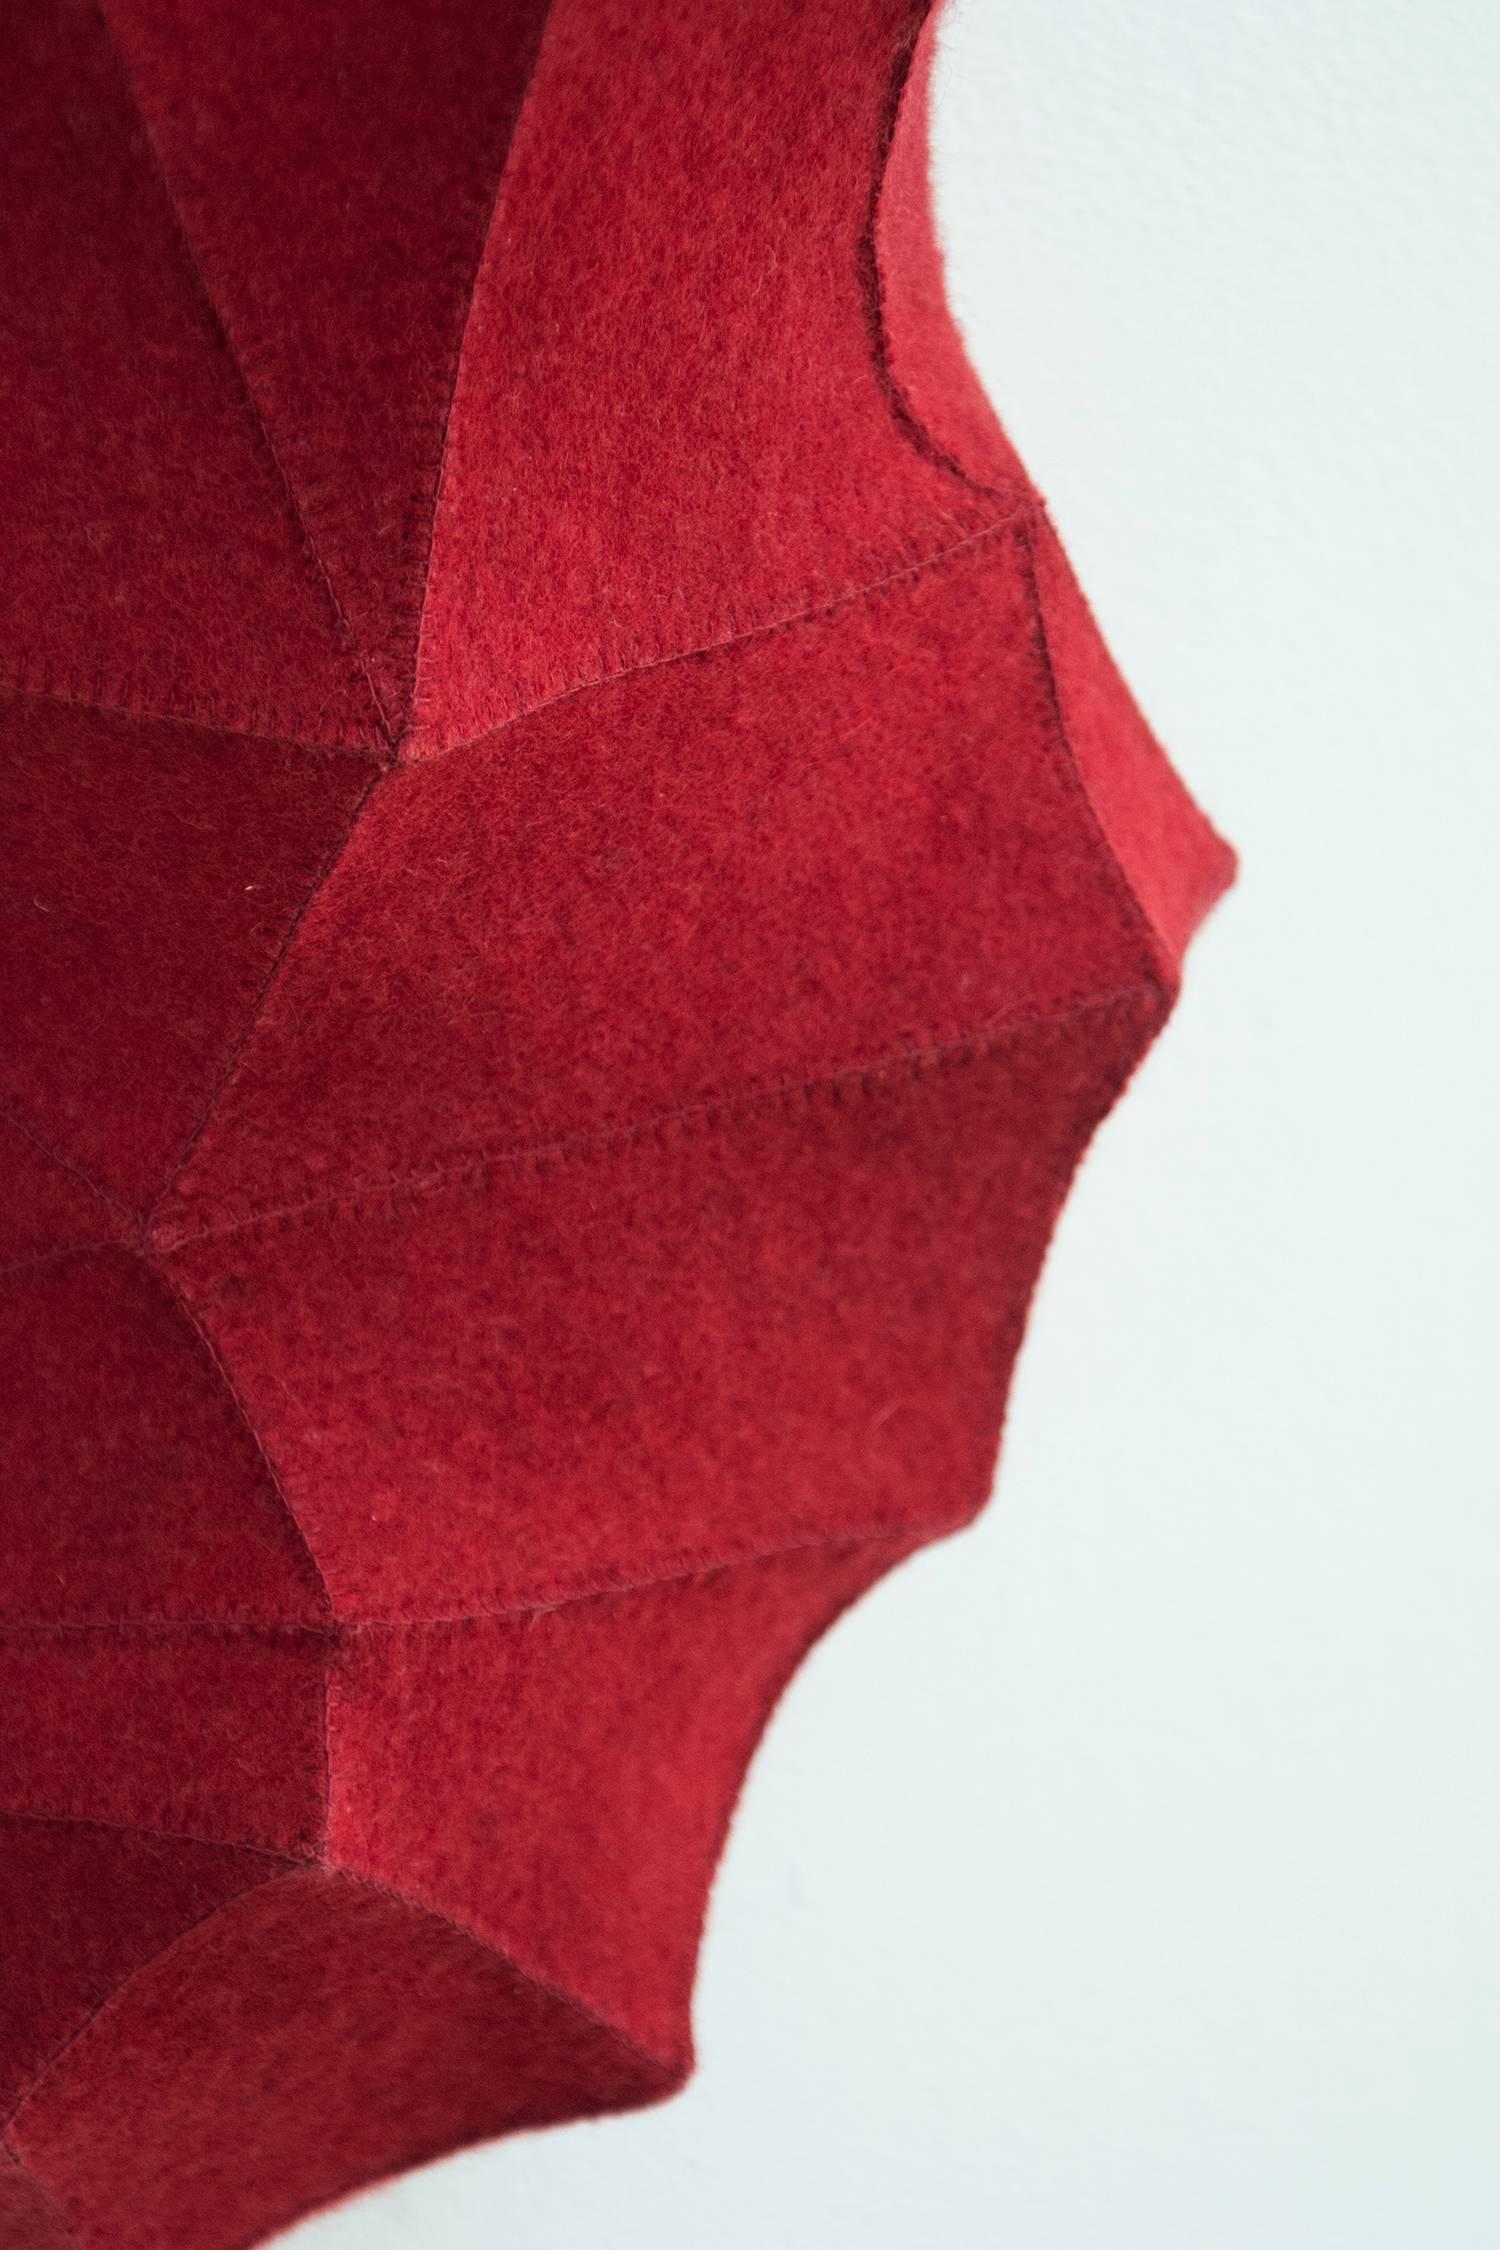 Faction - small, red, geometrical, 3D, felt, fabric, biomorphic, wall art - Abstract Sculpture by Chung-Im Kim